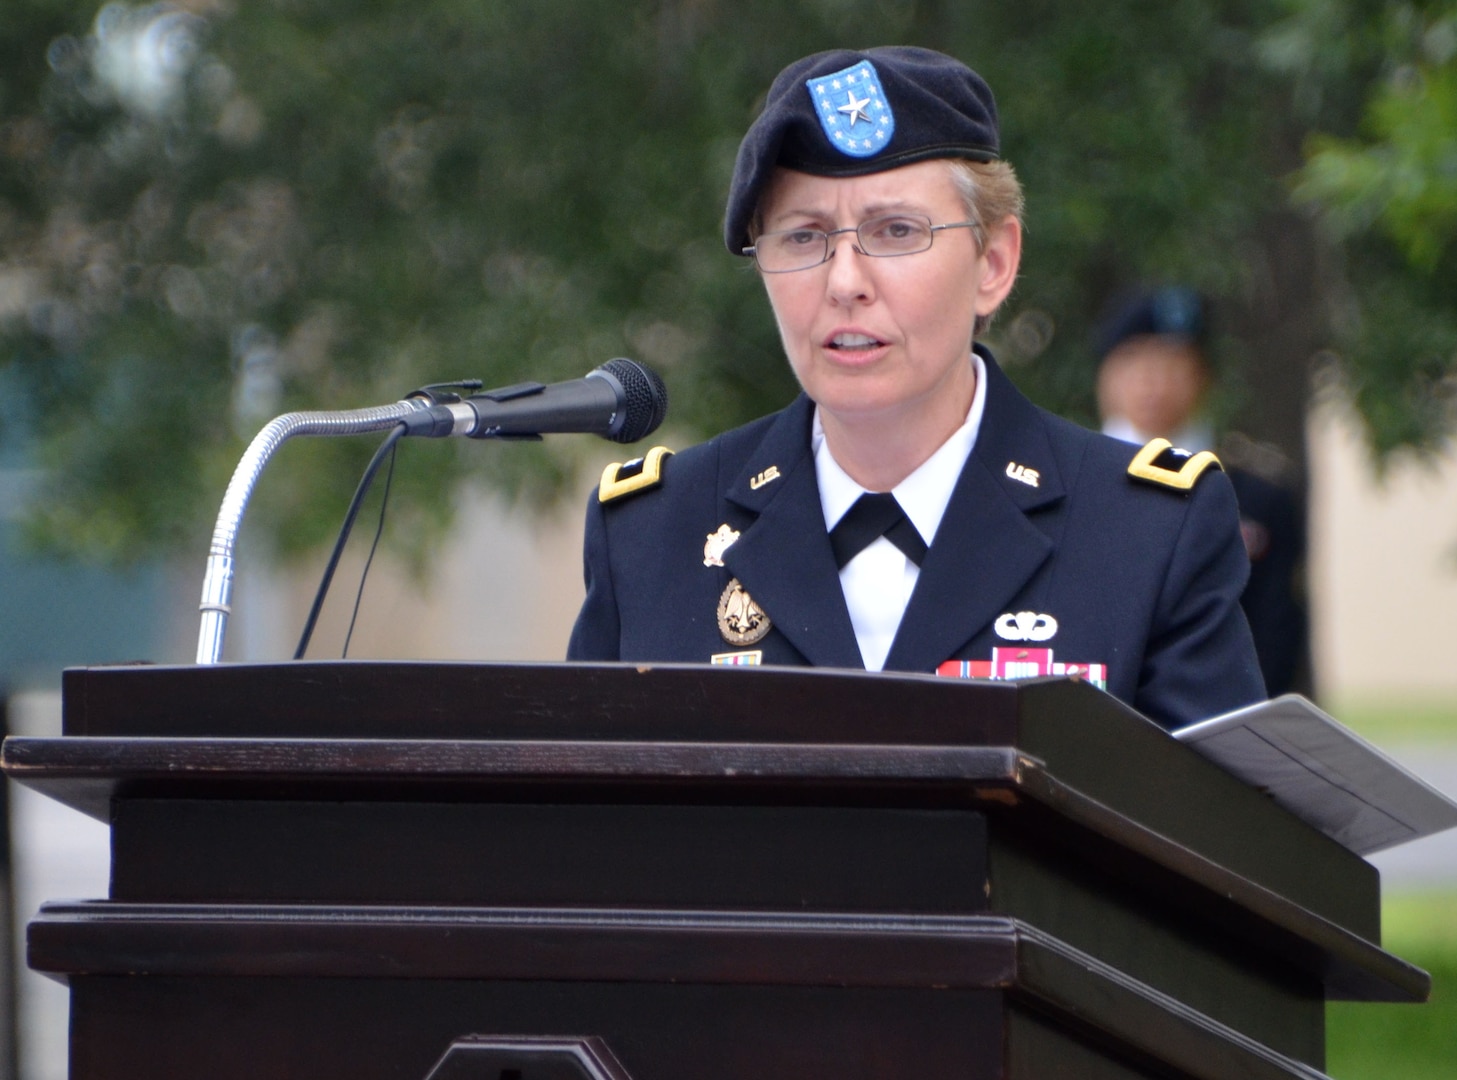 Brig. Gen. Christine Beeler addresses those in attendance for the Mission and Installation Contracting Command change-of-command ceremony July 9 at Joint Base San Antonio-Fort Sam Houston. Beeler assumed command of the MICC from Brig. Gen. Bill Boruff, who departs for his next assignment at Redstone Arsenal, Alabama. Officiating the ceremony was Maj. Gen. Paul Pardew, the commanding general for the Army Contracting Command at Redstone Arsenal, Alabama.